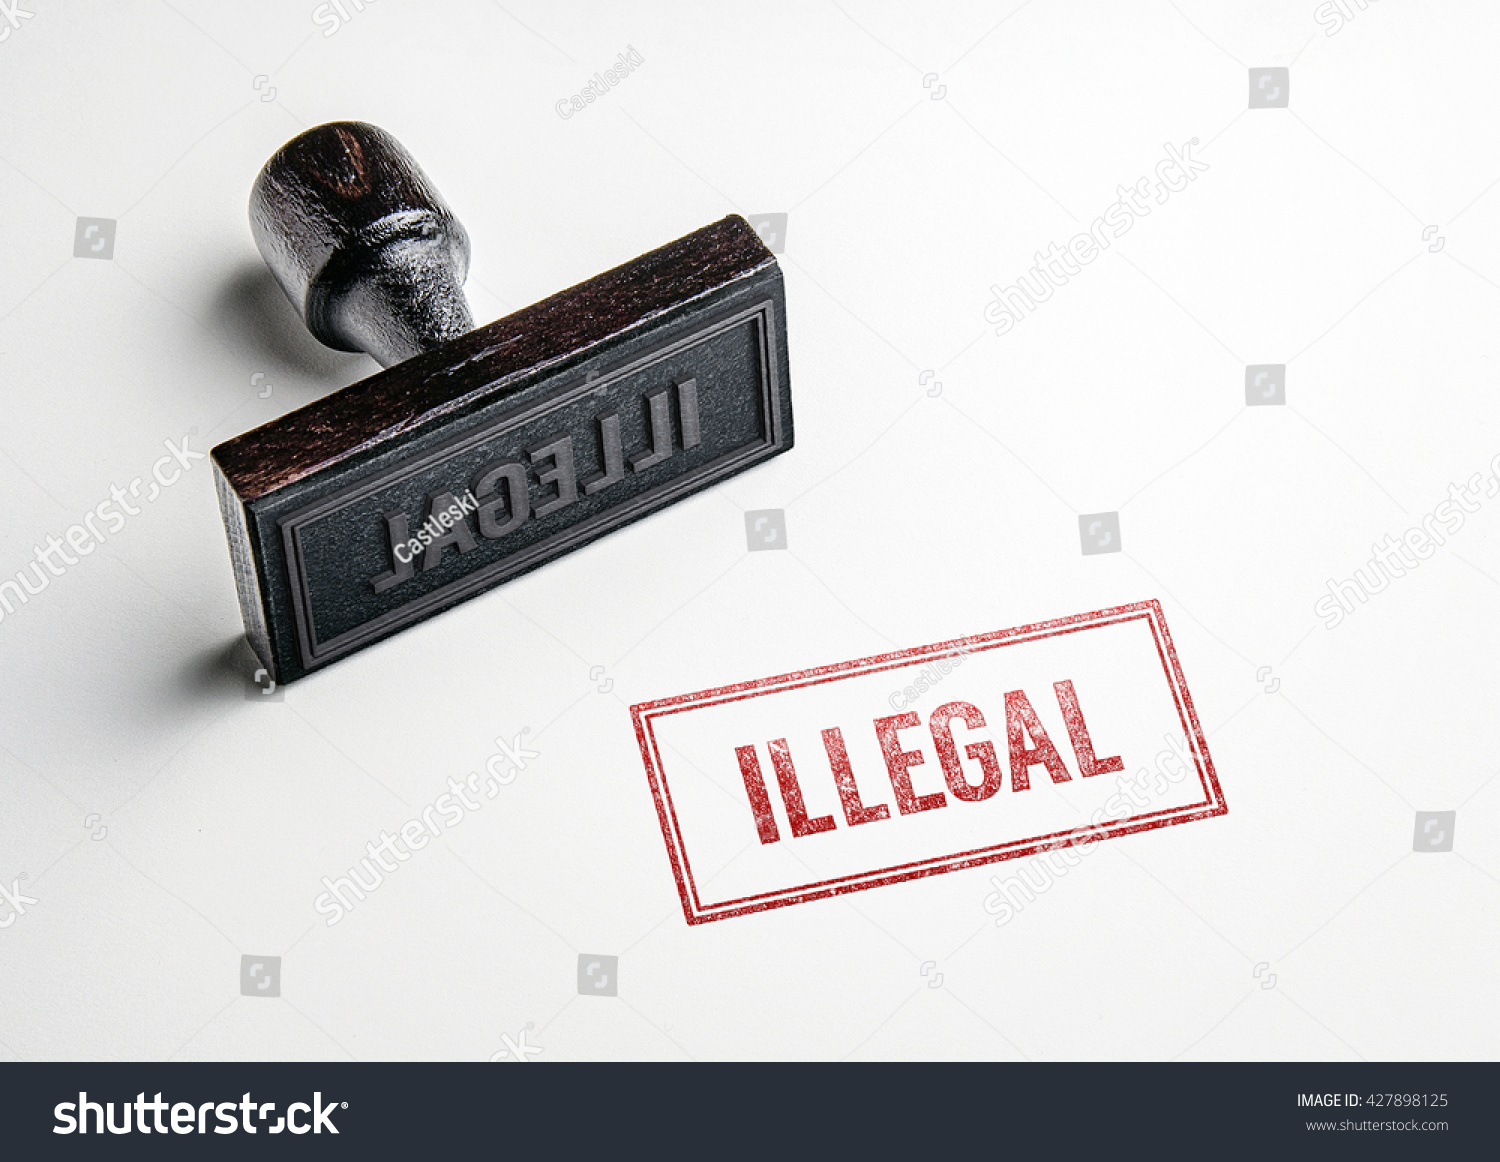 Rubber stamping that says 'Illegal'. #427898125